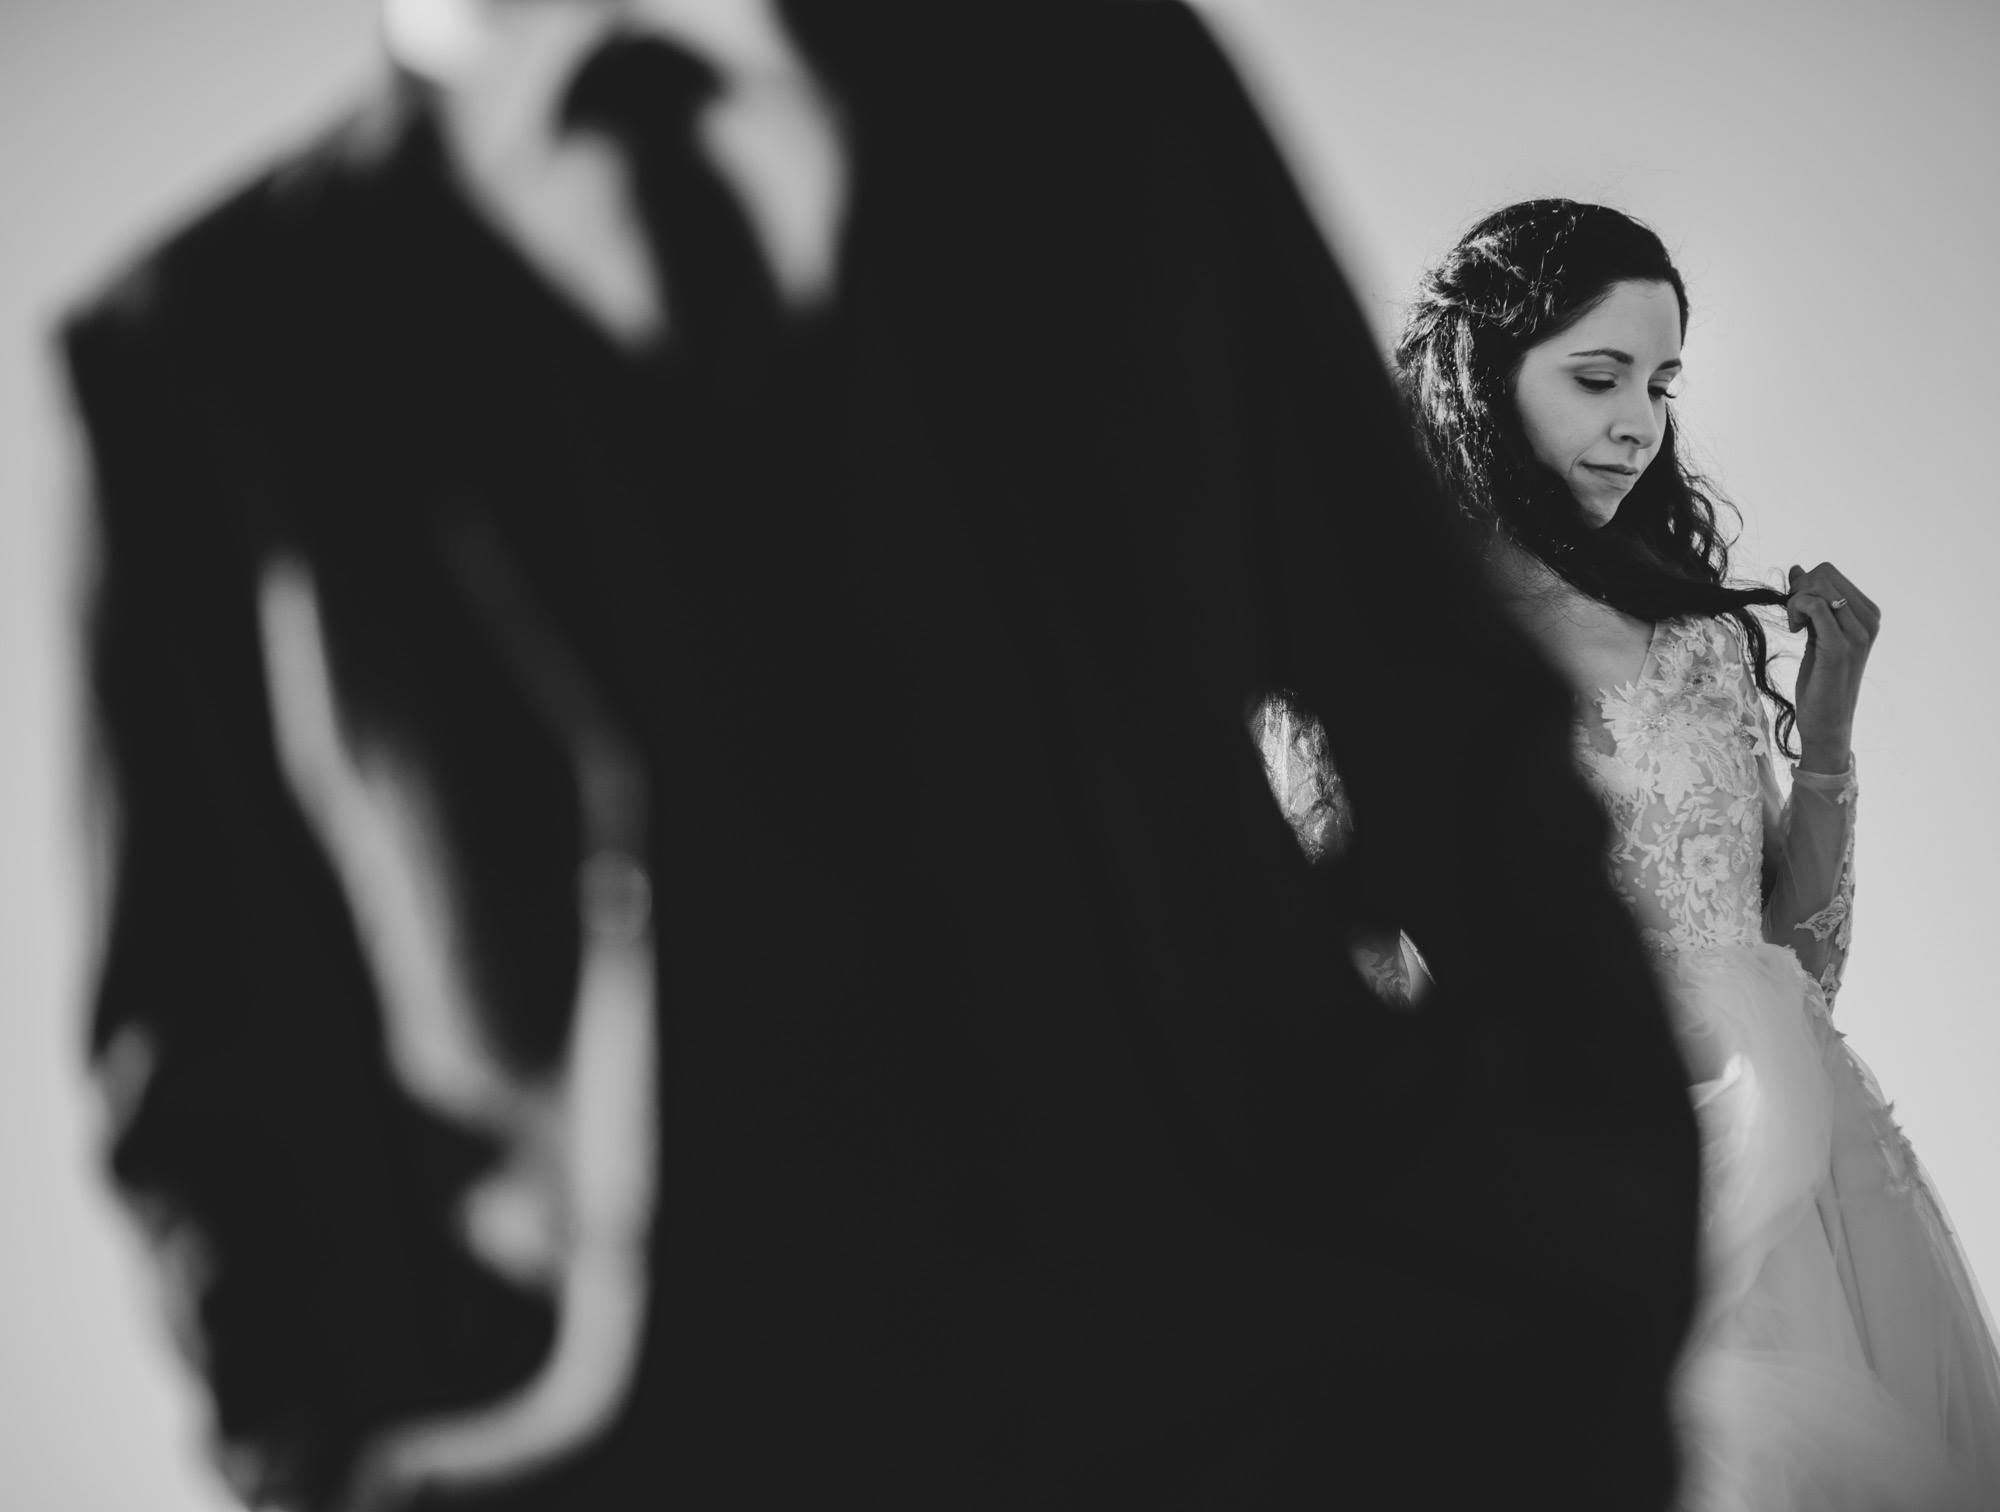 A black and white close up portrait of a bride and groom 